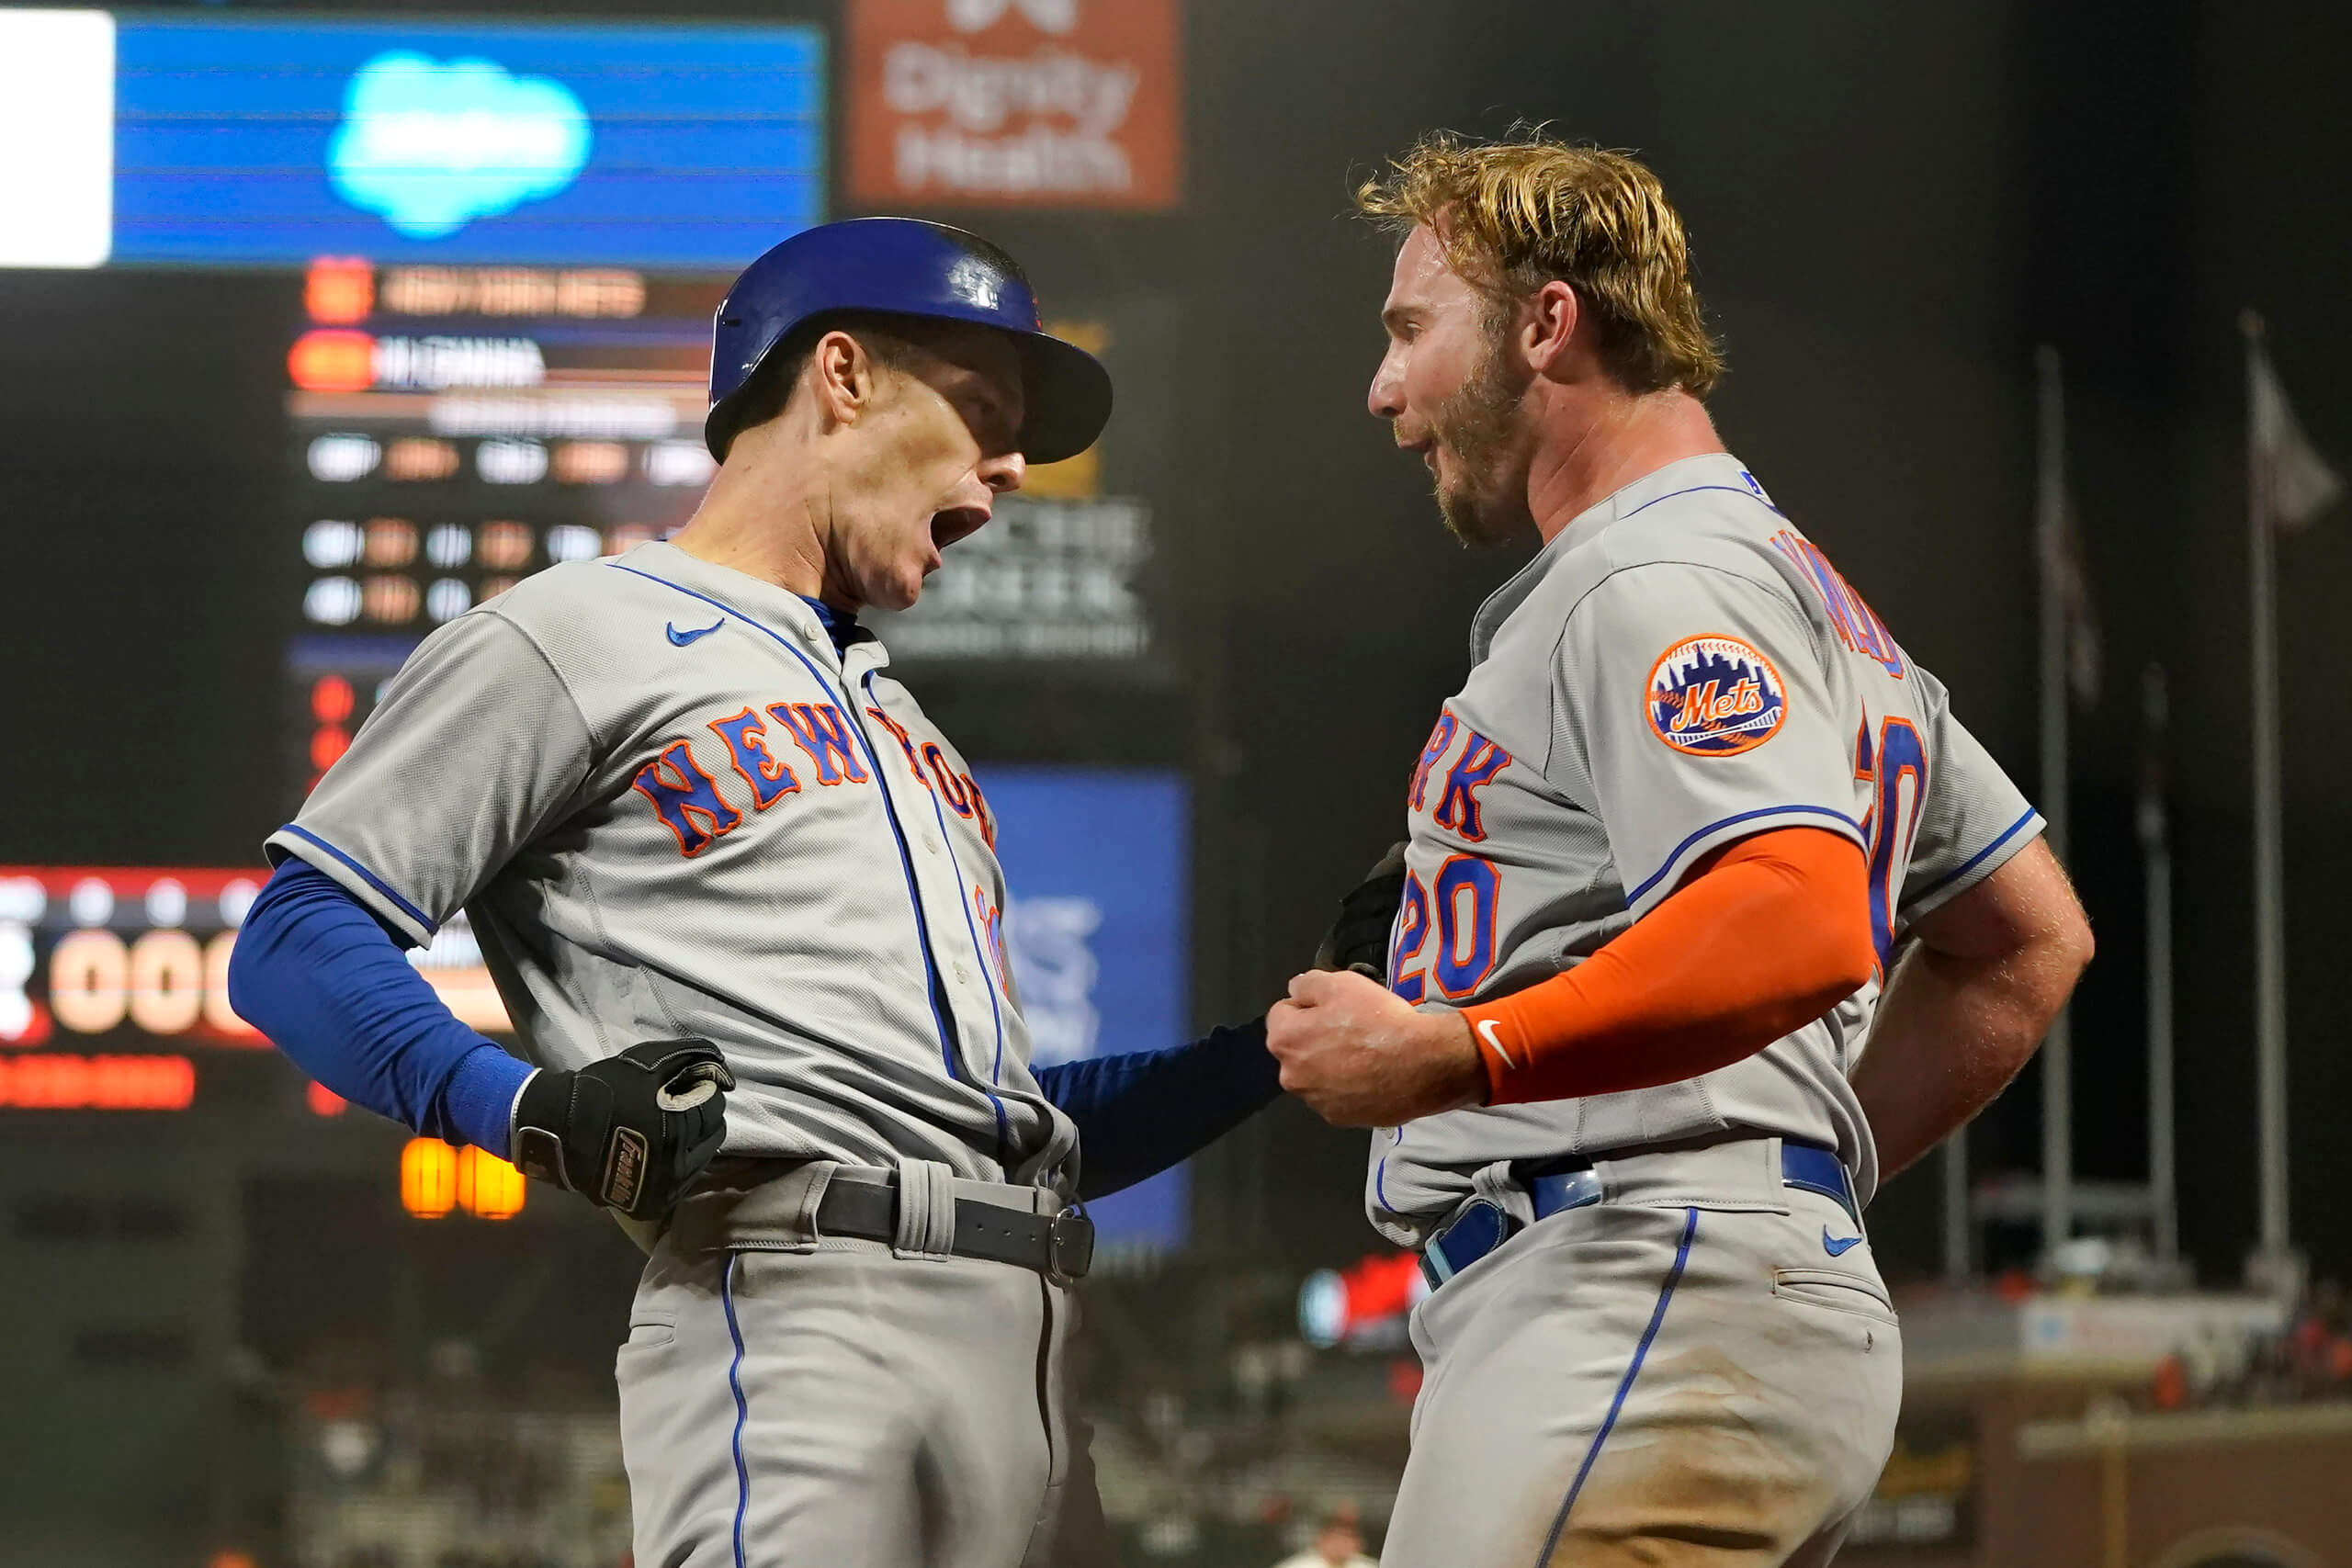 Pete Alonso blast helps power Mets to blowout win over Giants